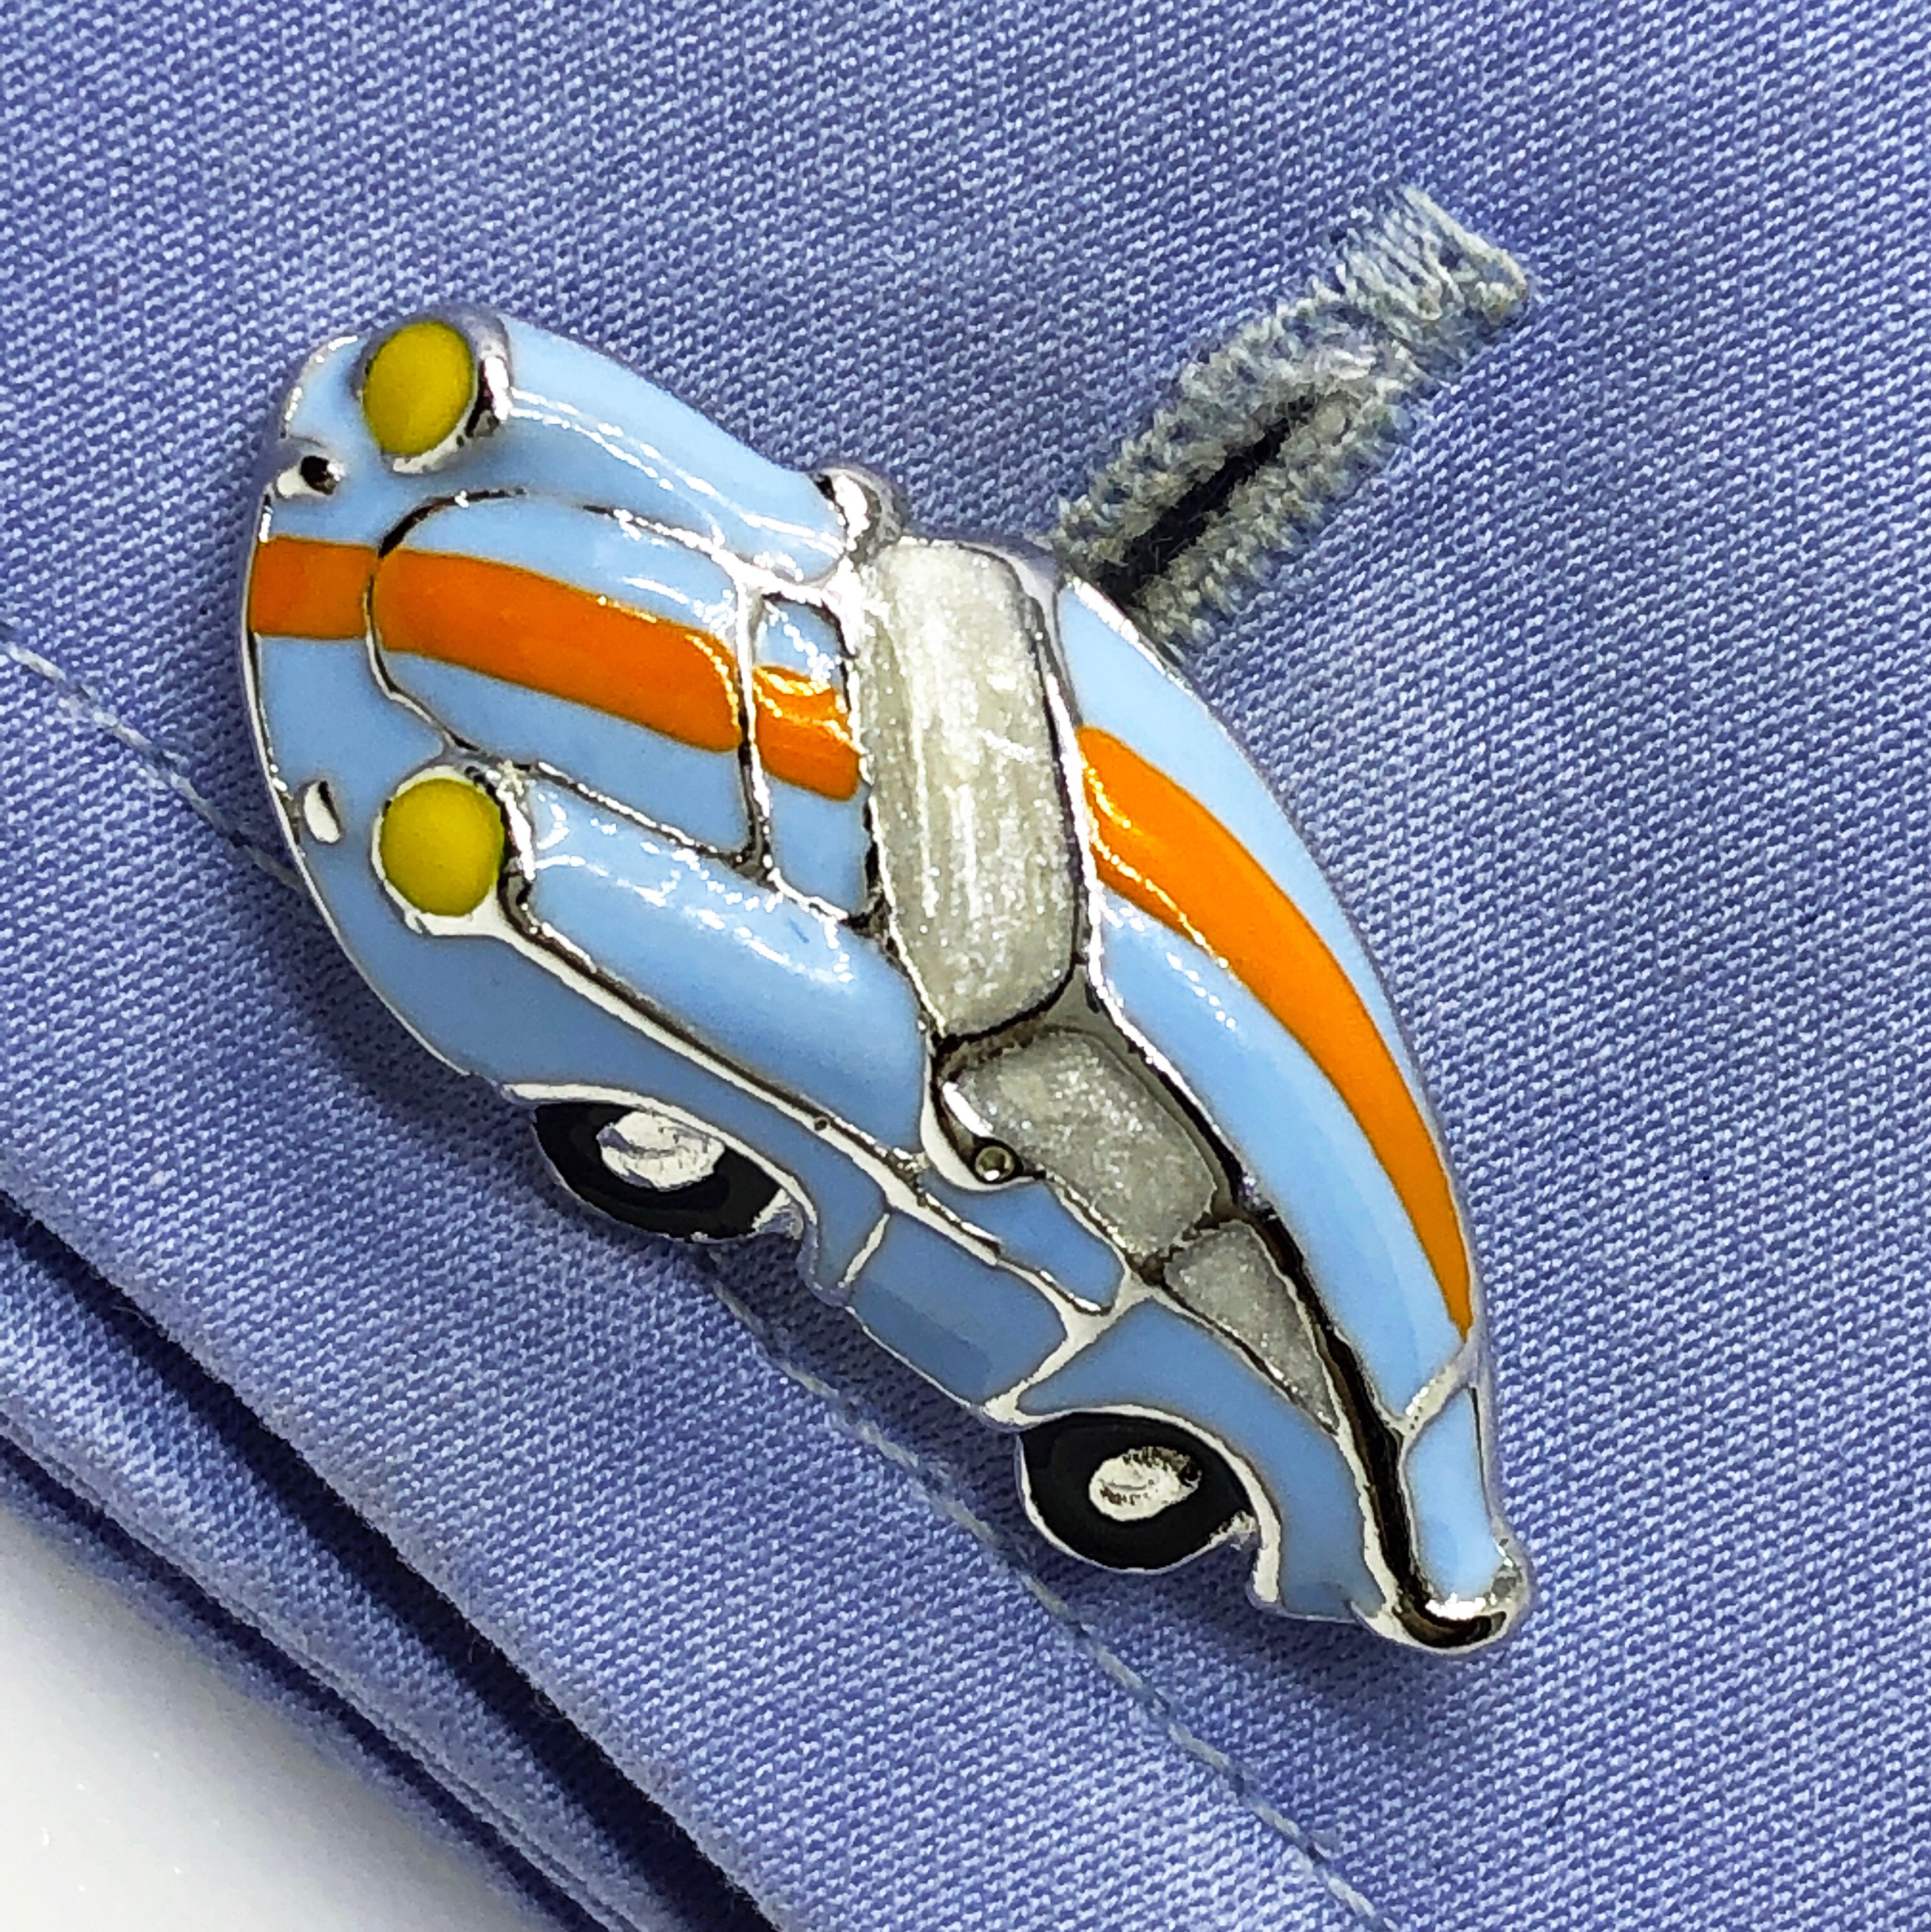 Berca Enameled Le Man’s Racing Color 911Porsche Shaped Sterling Silver Cufflinks 2